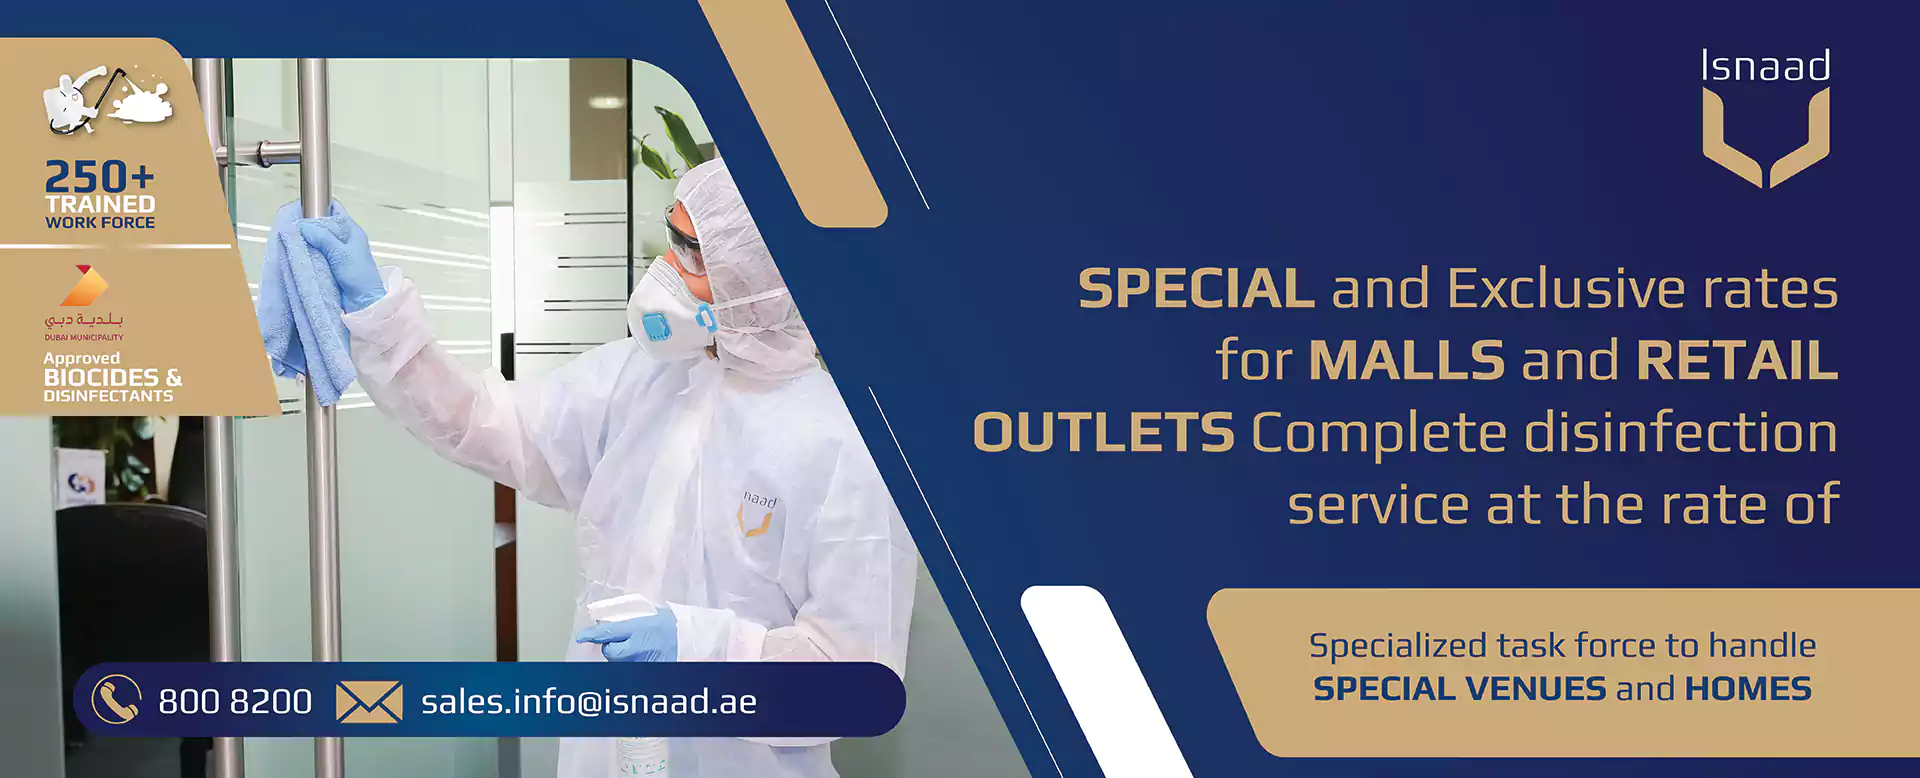 Special and Exclusivr rates for Malls and Retail Outlets